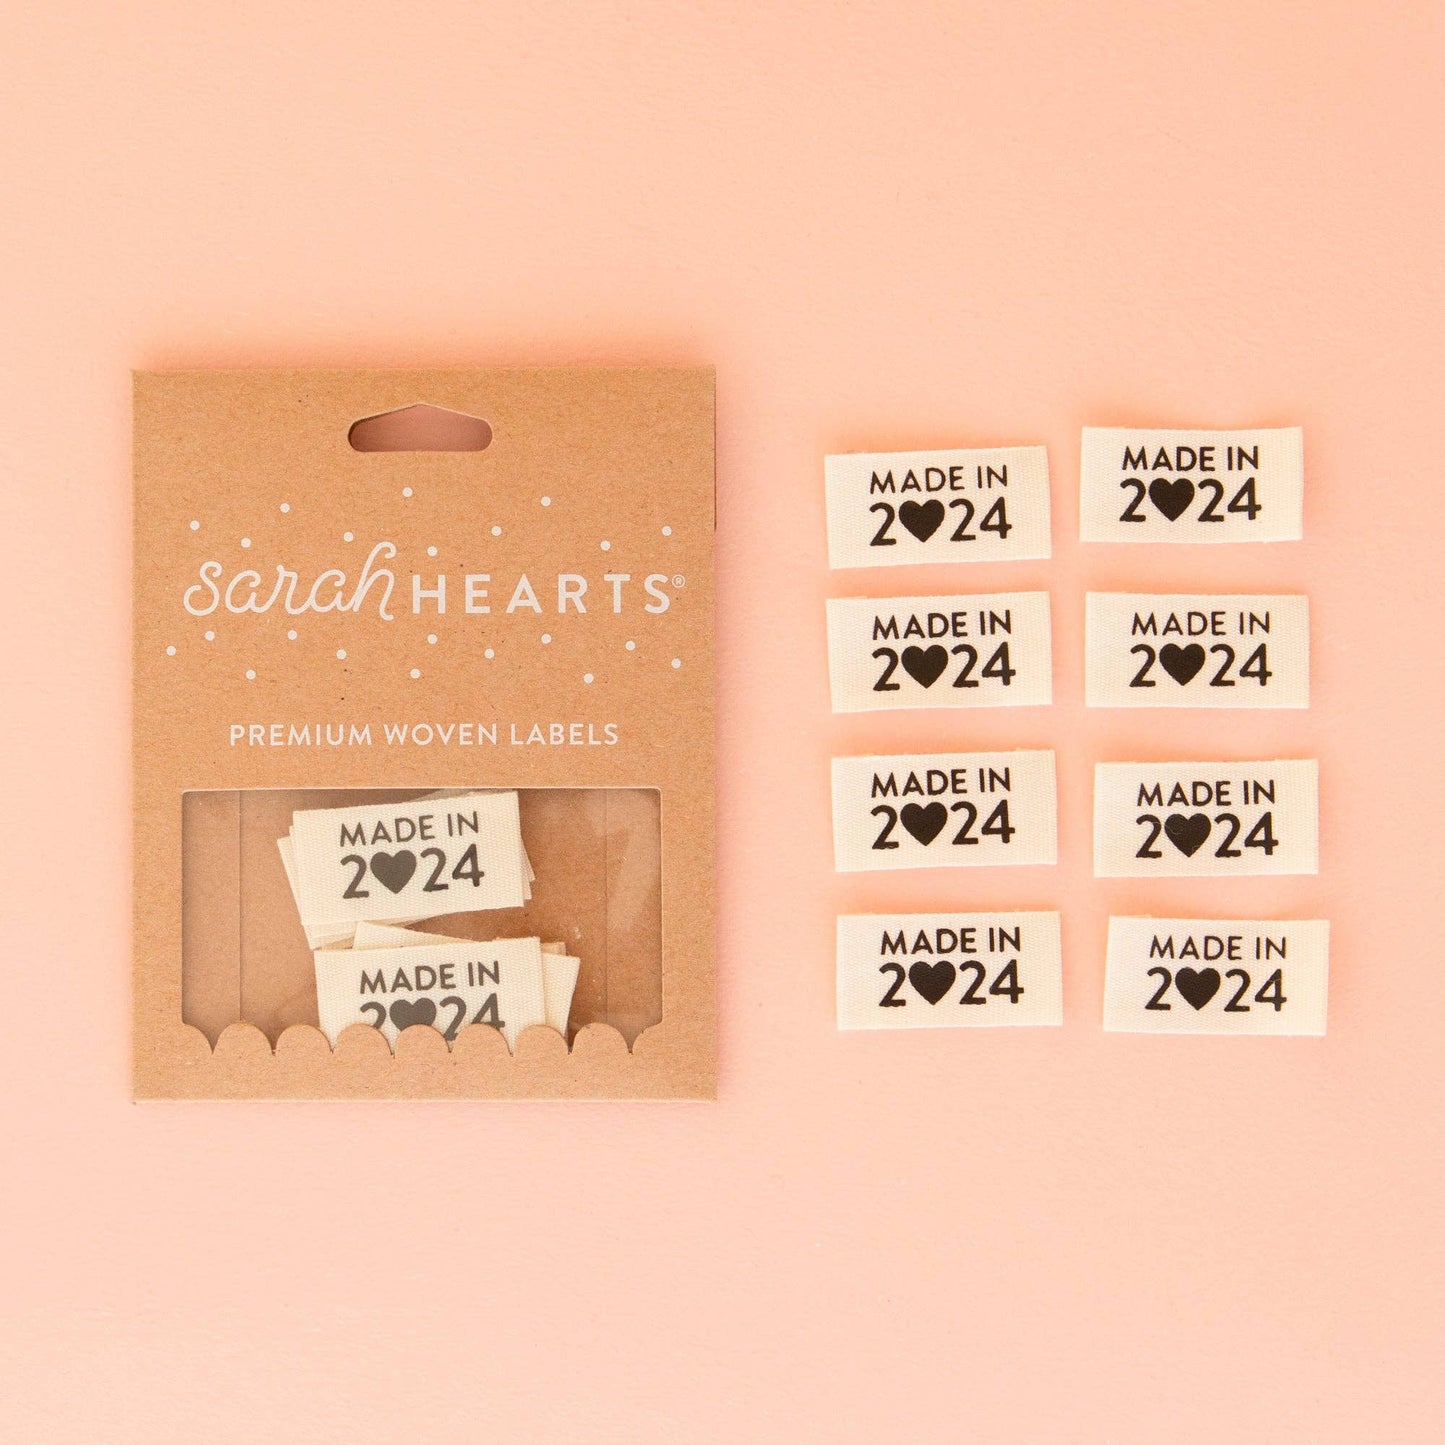 Sarah Hearts - Made in 2024 Organic Cotton Labels